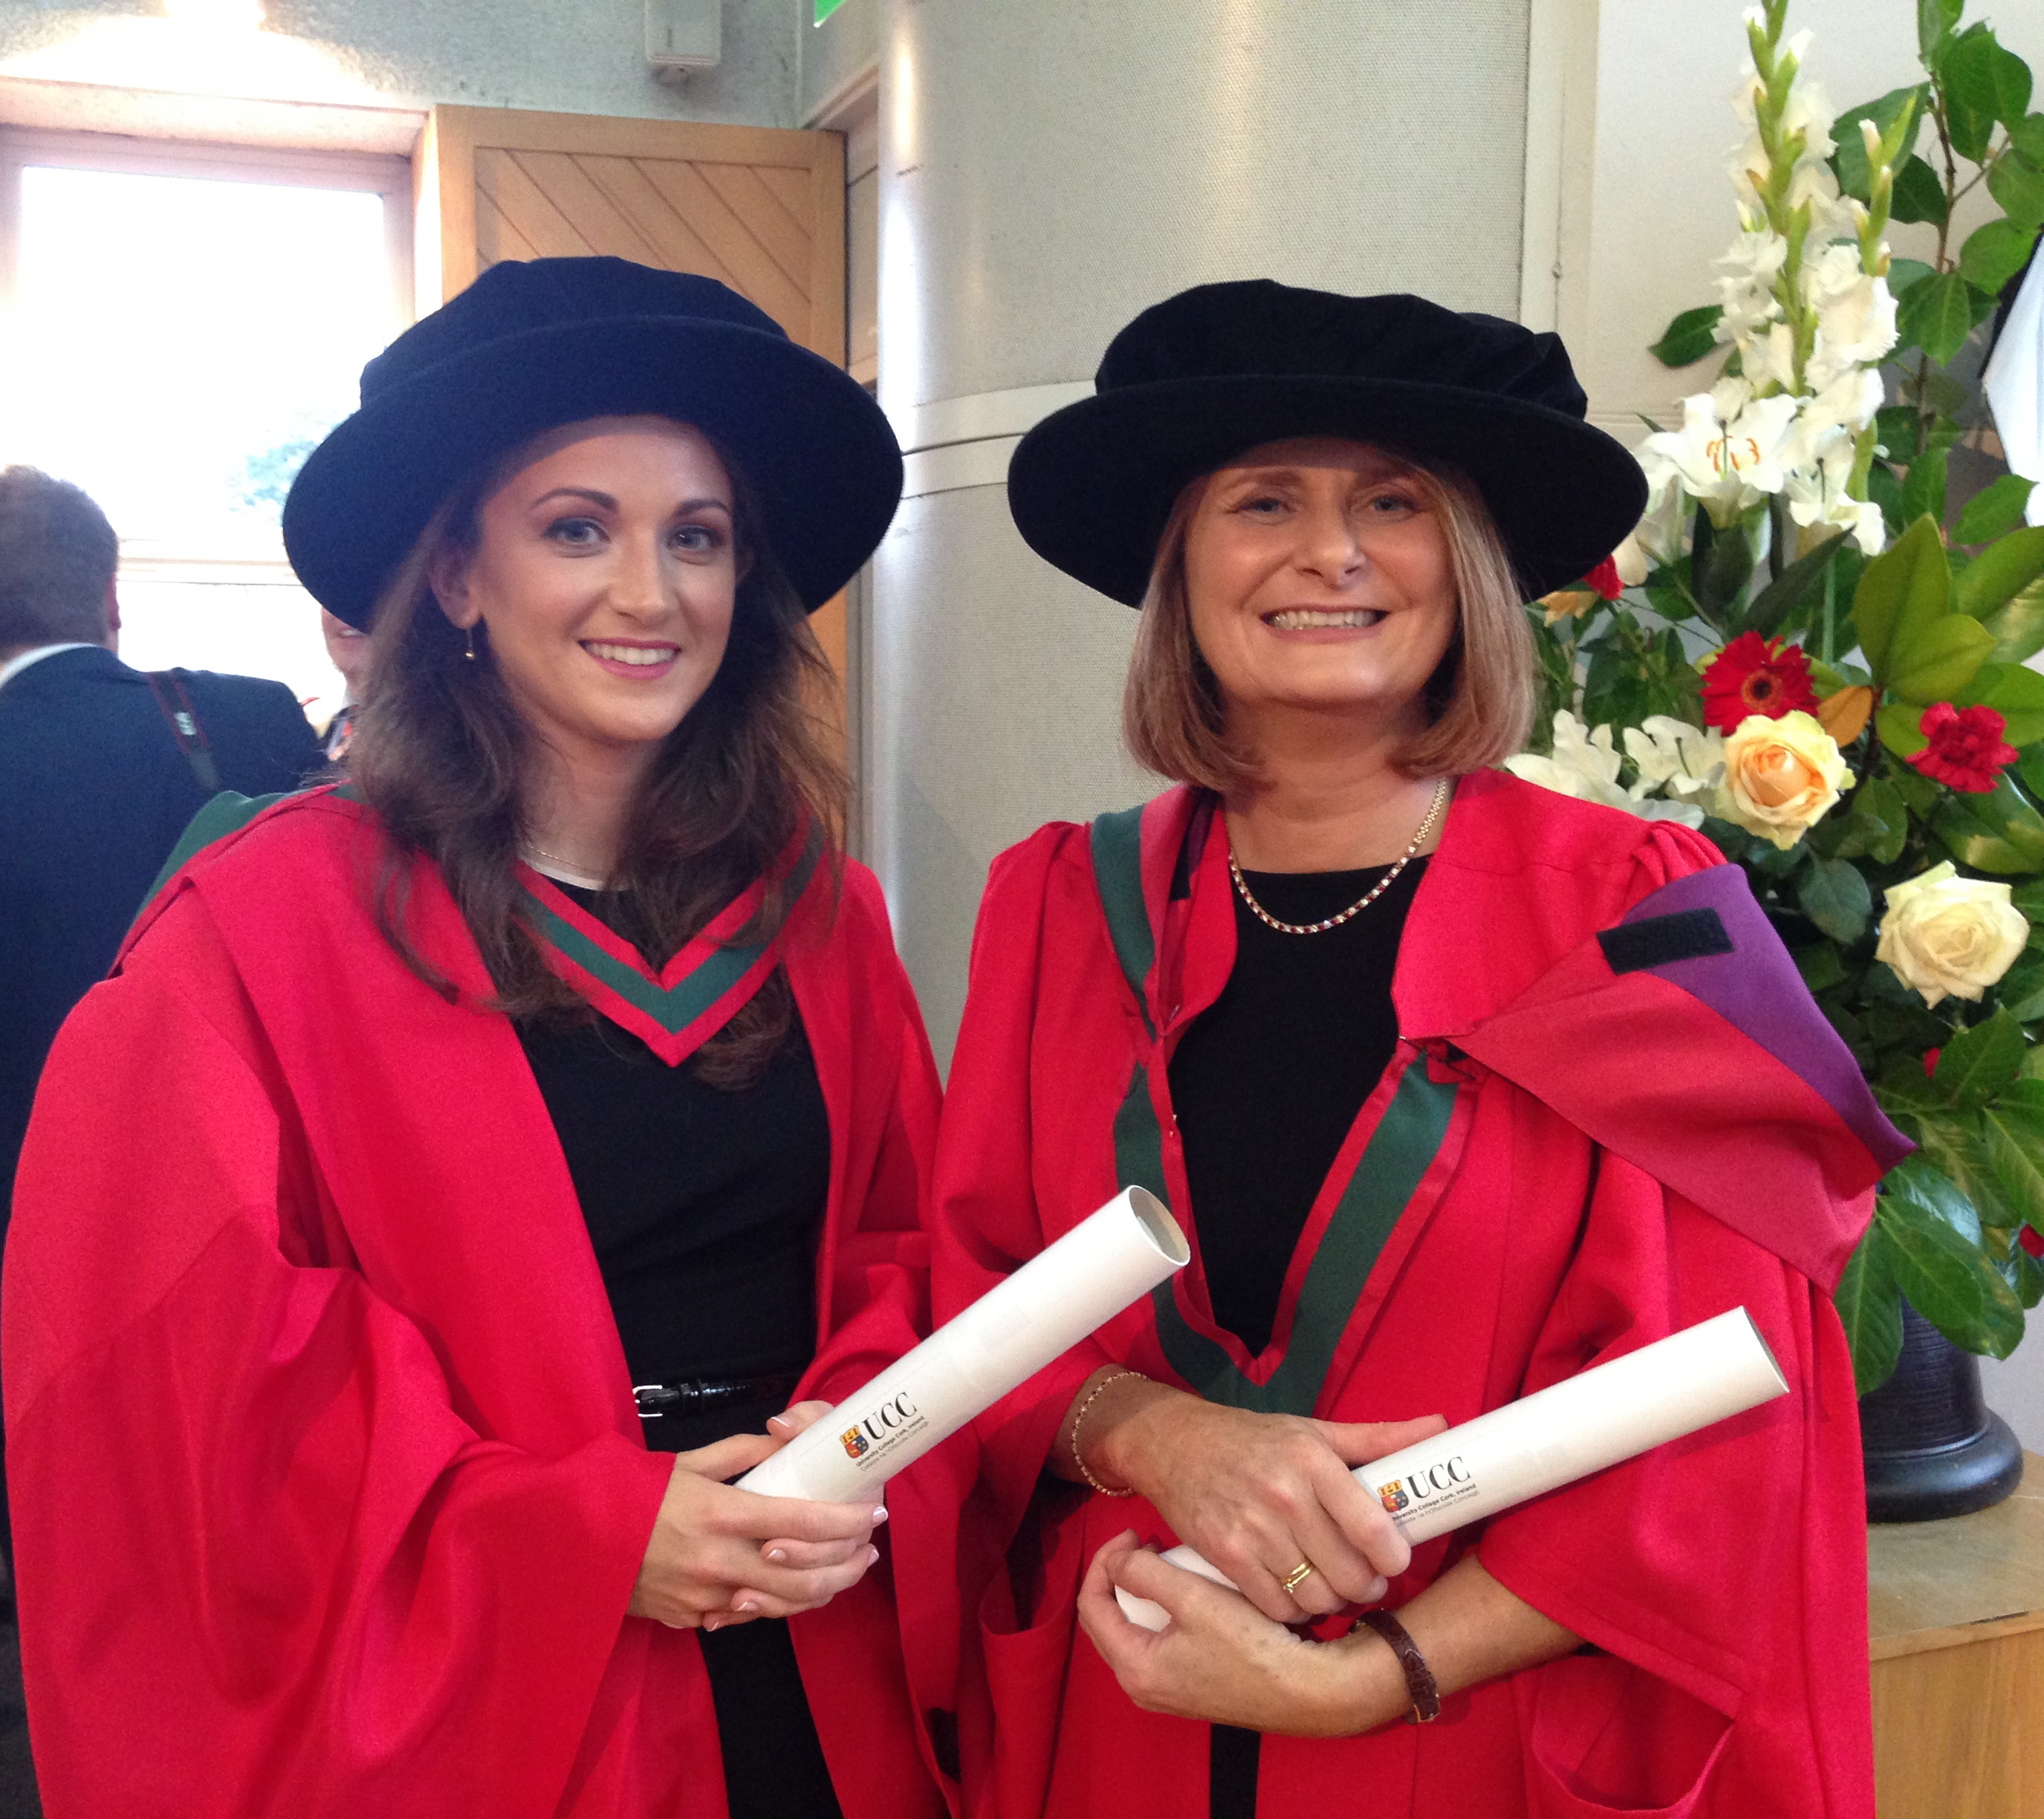 Congratulations to Dr McMorrow & Dr Harding 